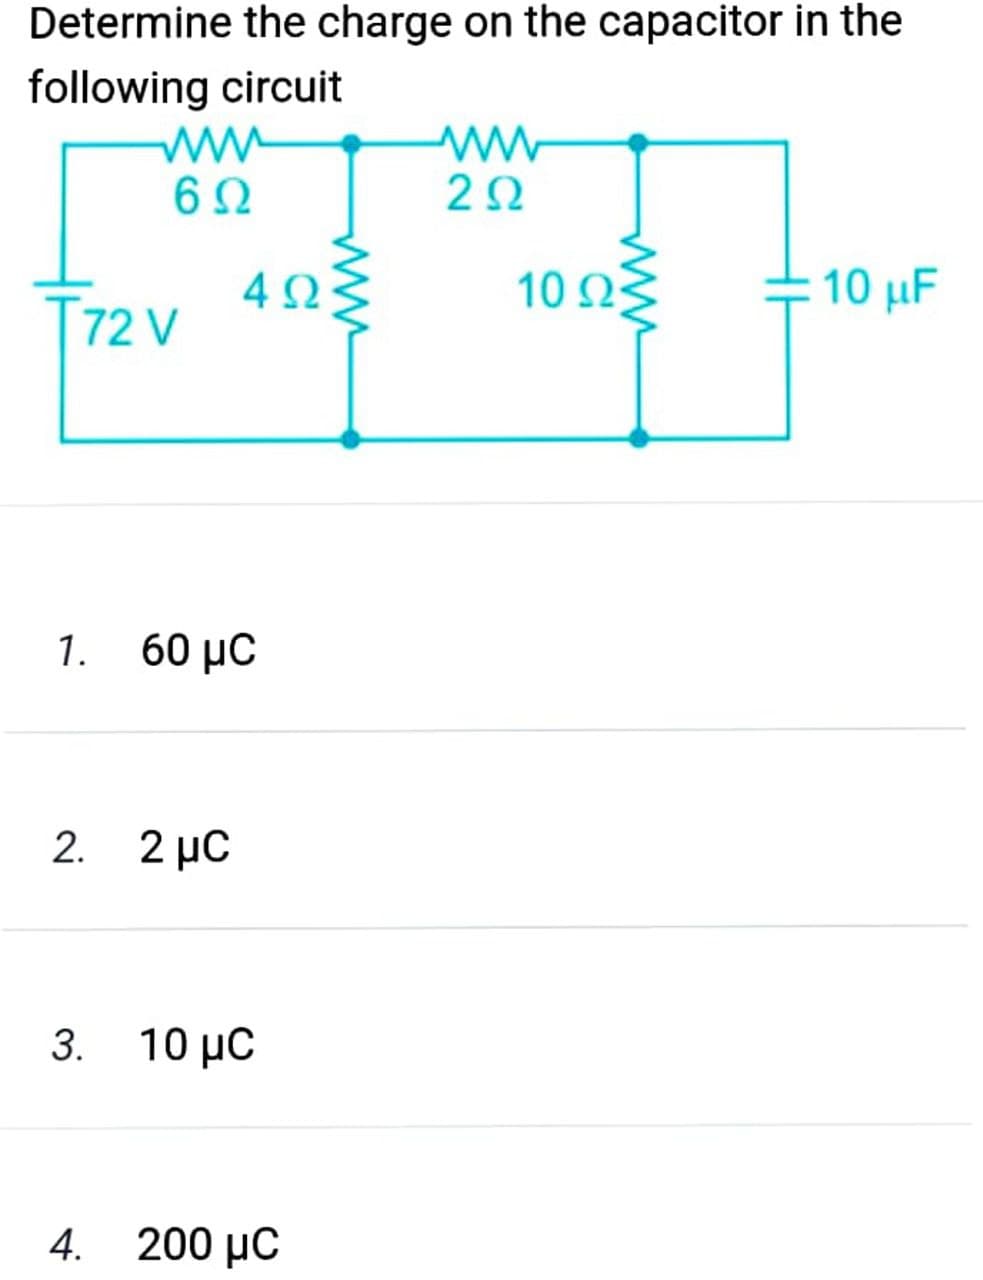 Determine the charge on the capacitor in the
following circuit
2Ω
10 n3
10 μ
4Ω
[72 V
1.
60 μC
2. 2 µC
3. 10 μC
4. 200 µC
ww
